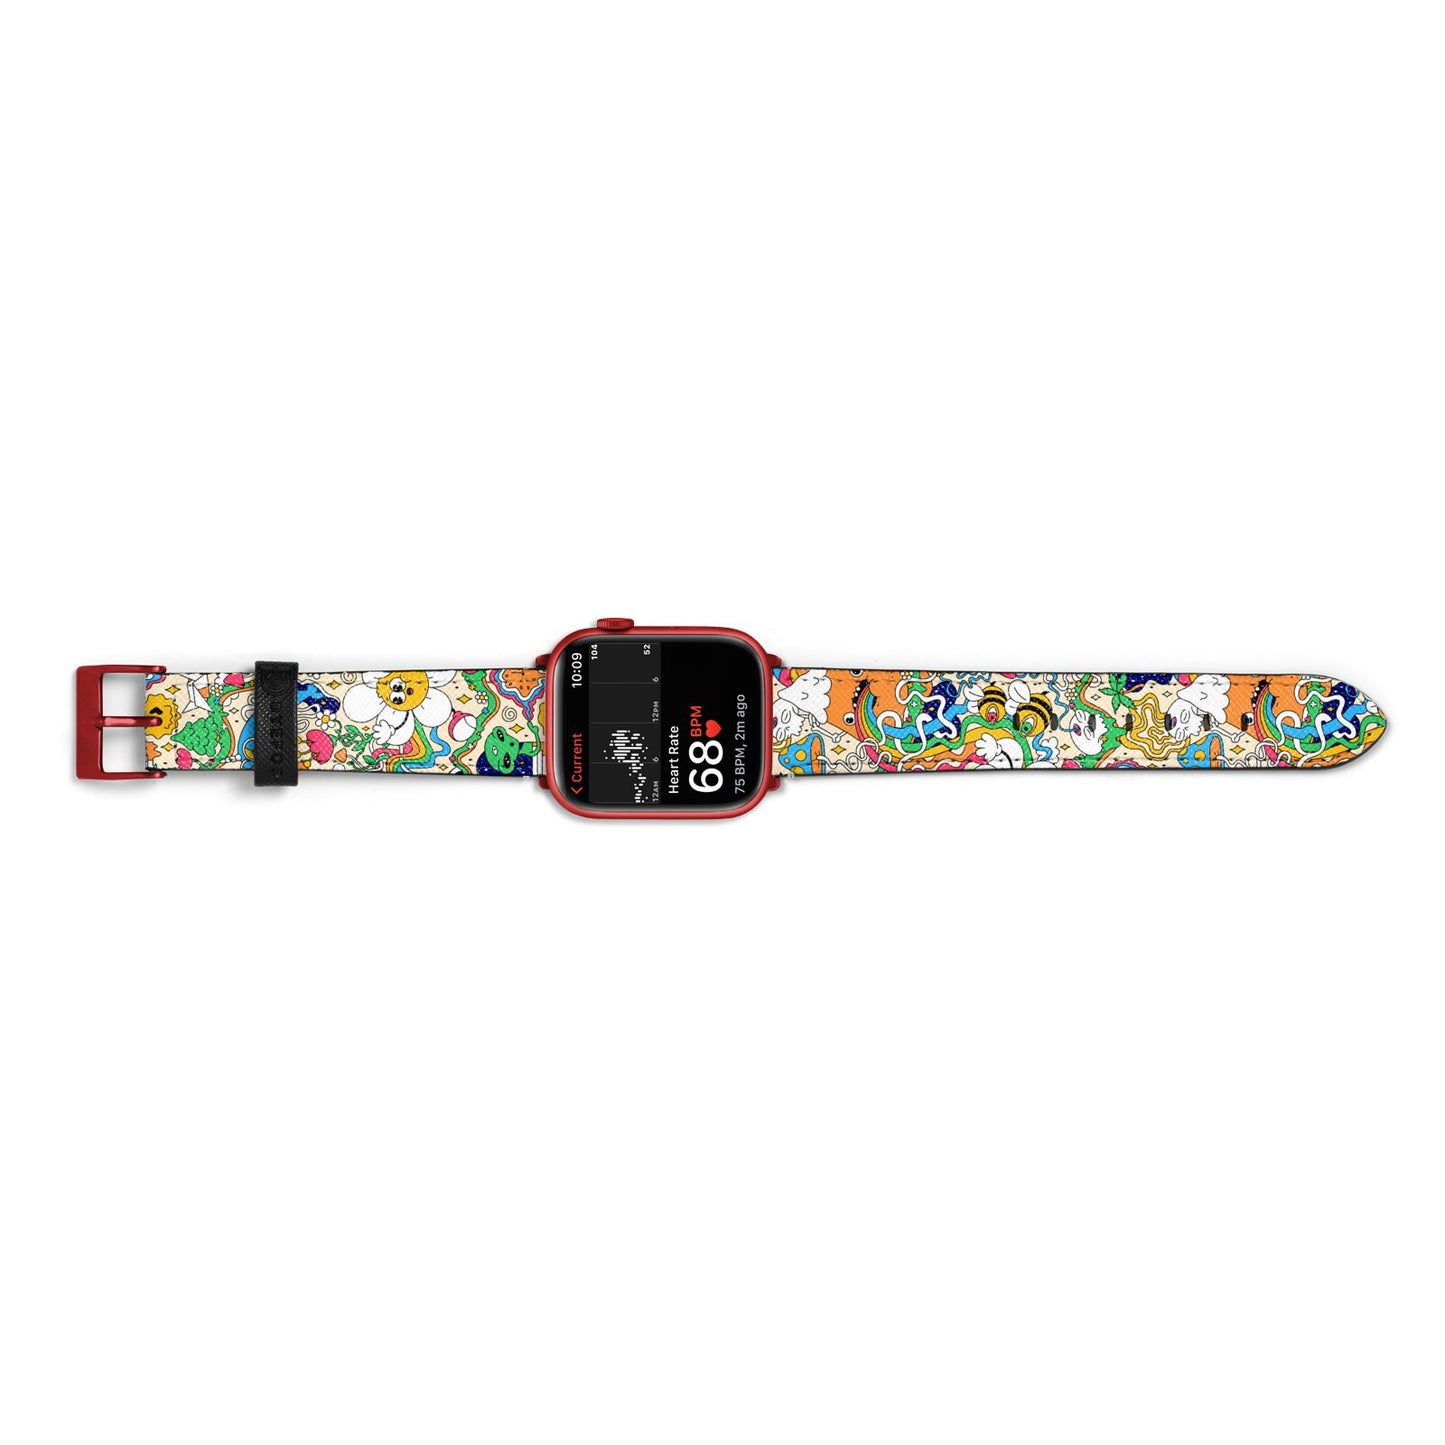 Psychedelic Trippy Apple Watch Strap Size 38mm Landscape Image Red Hardware